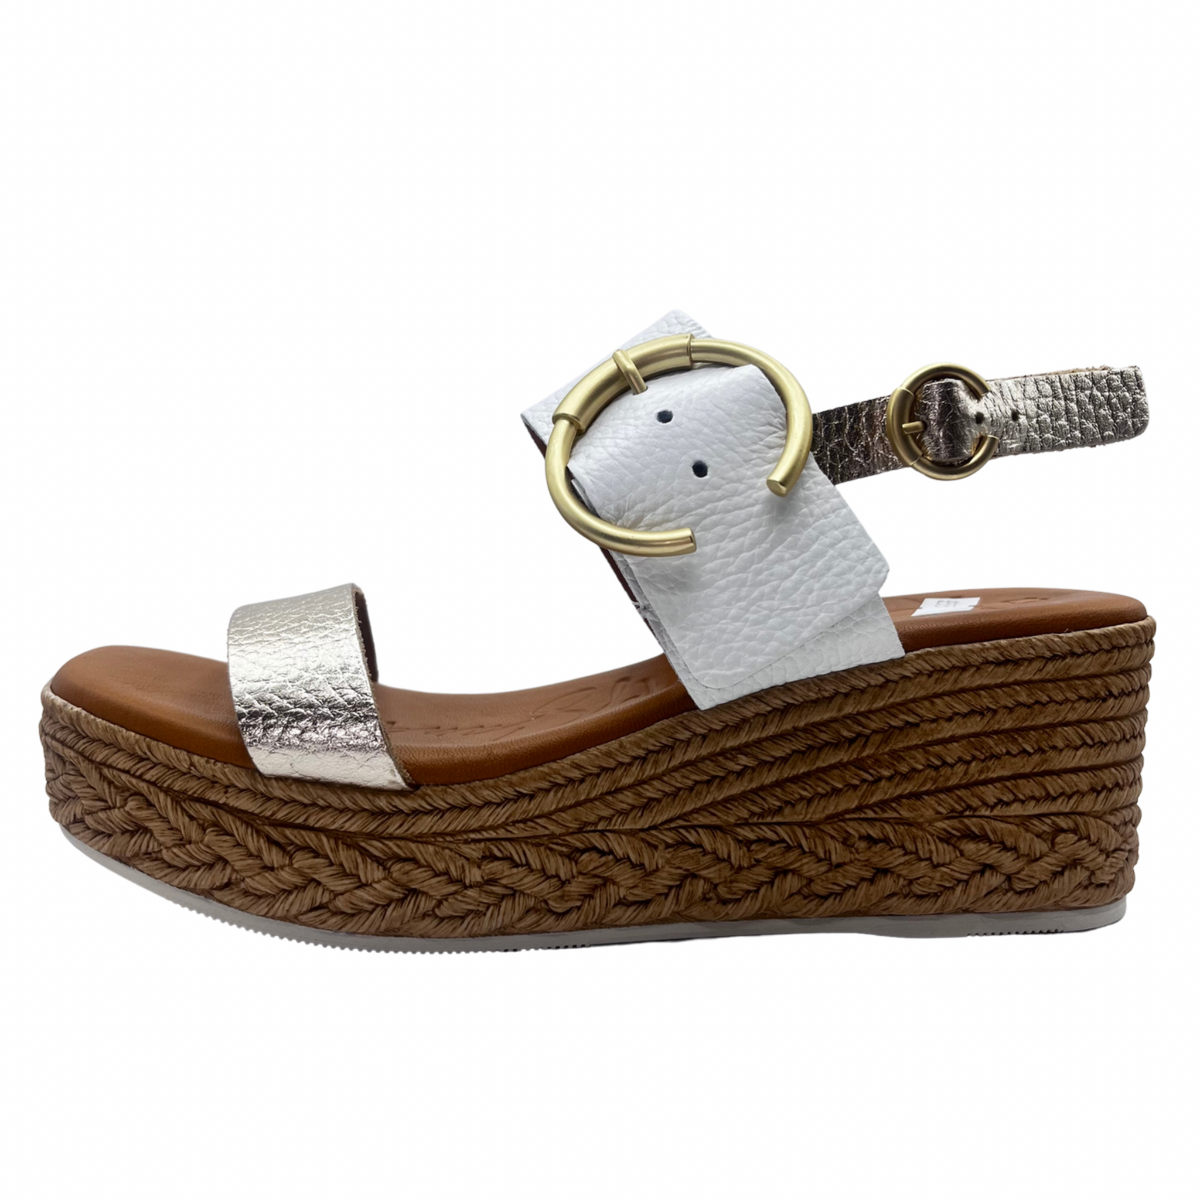 Oh My Sandals Woven Wedge White and Gold Leather Sandal